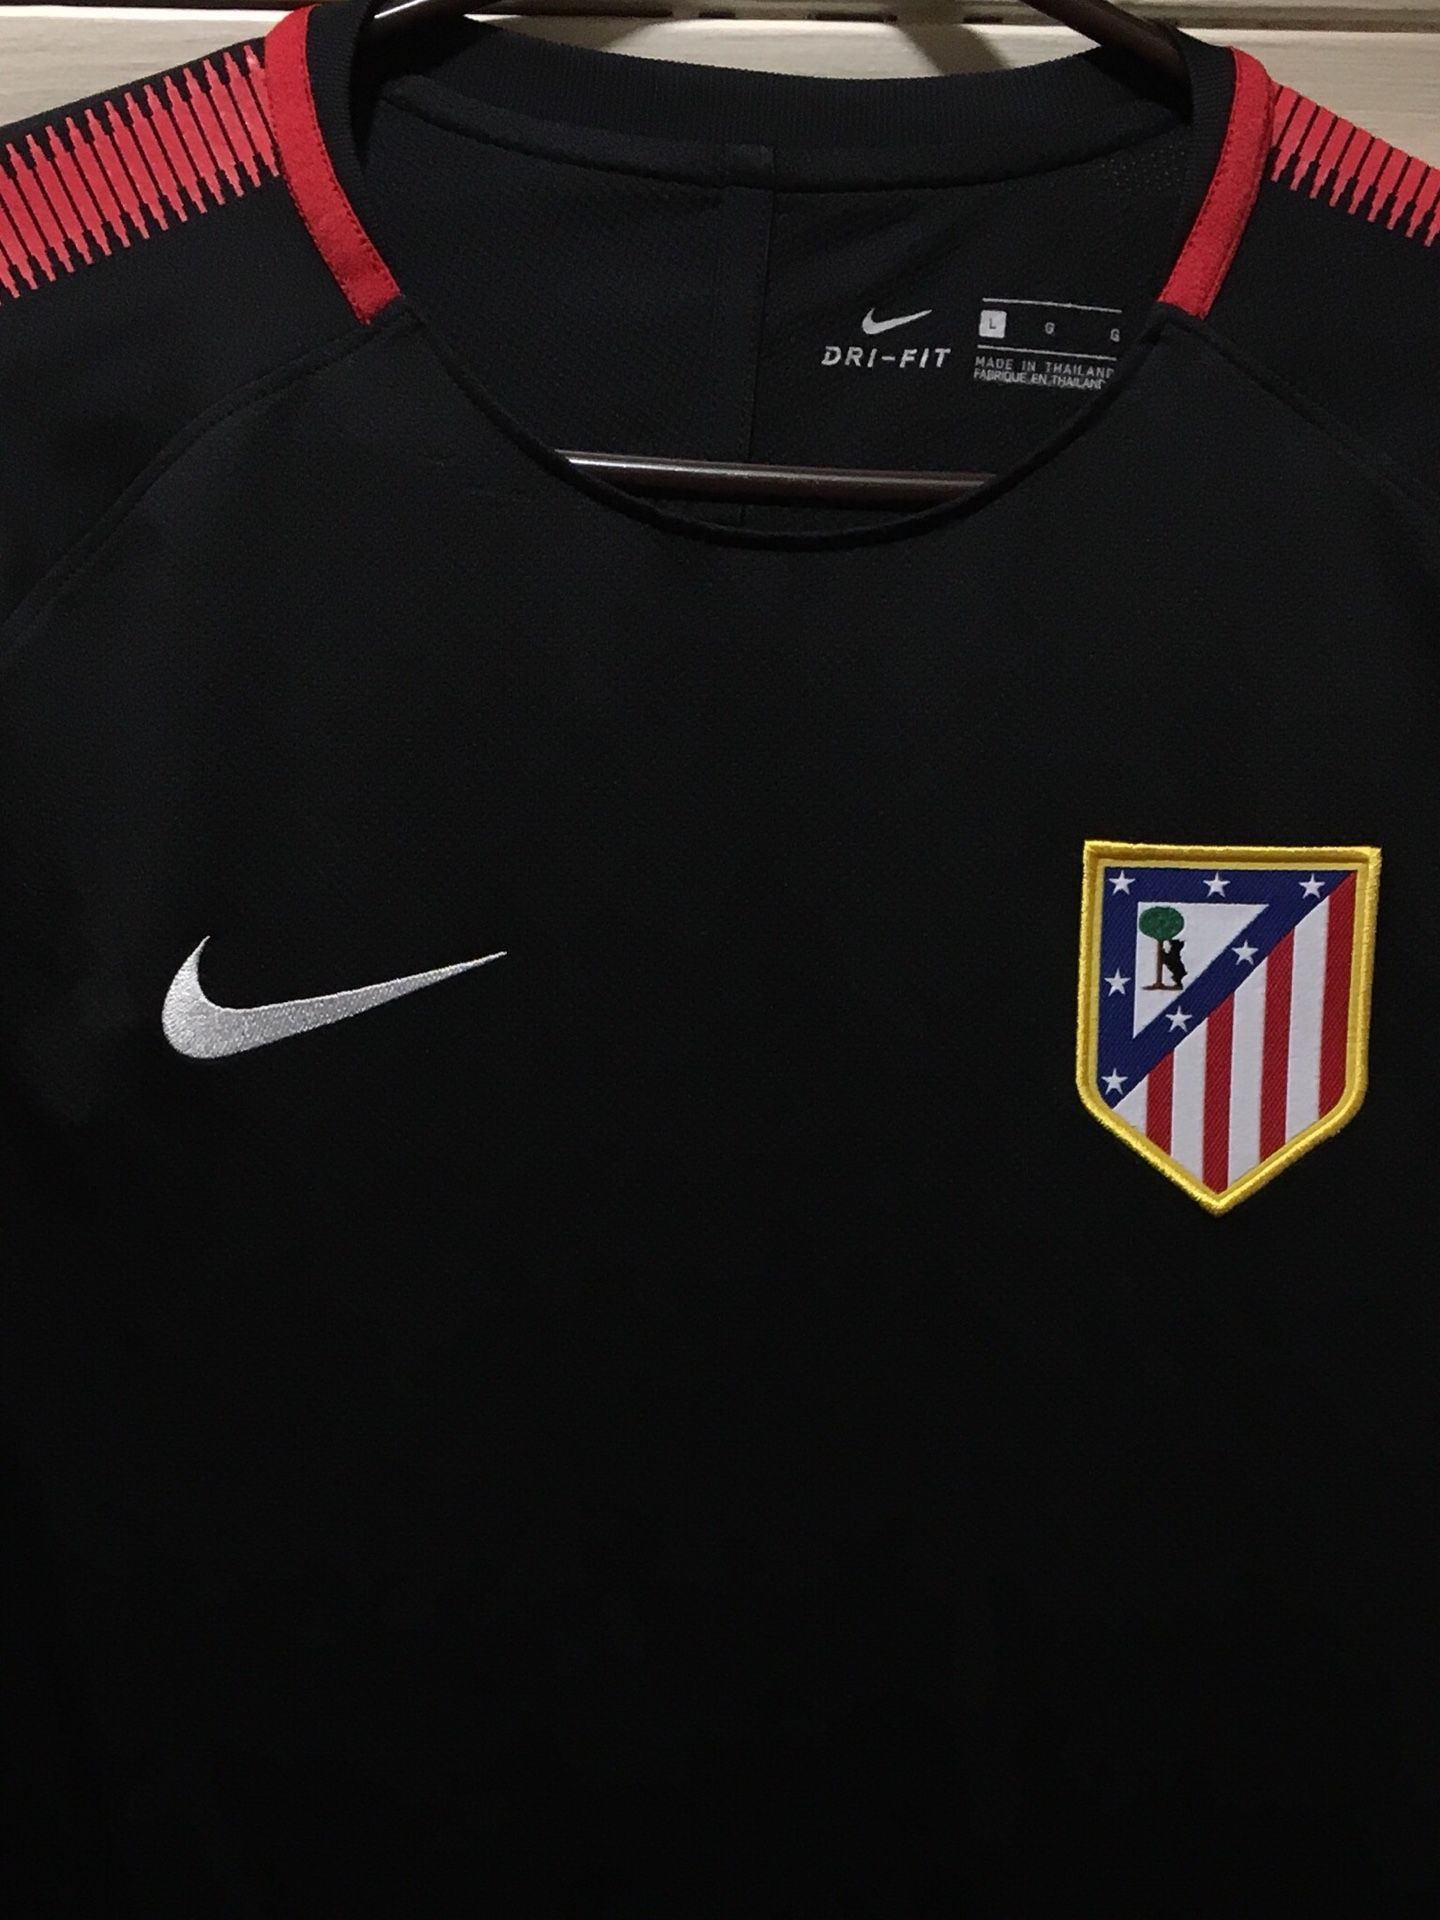 Brand new Nike soccer athletico madrid training jersey DS